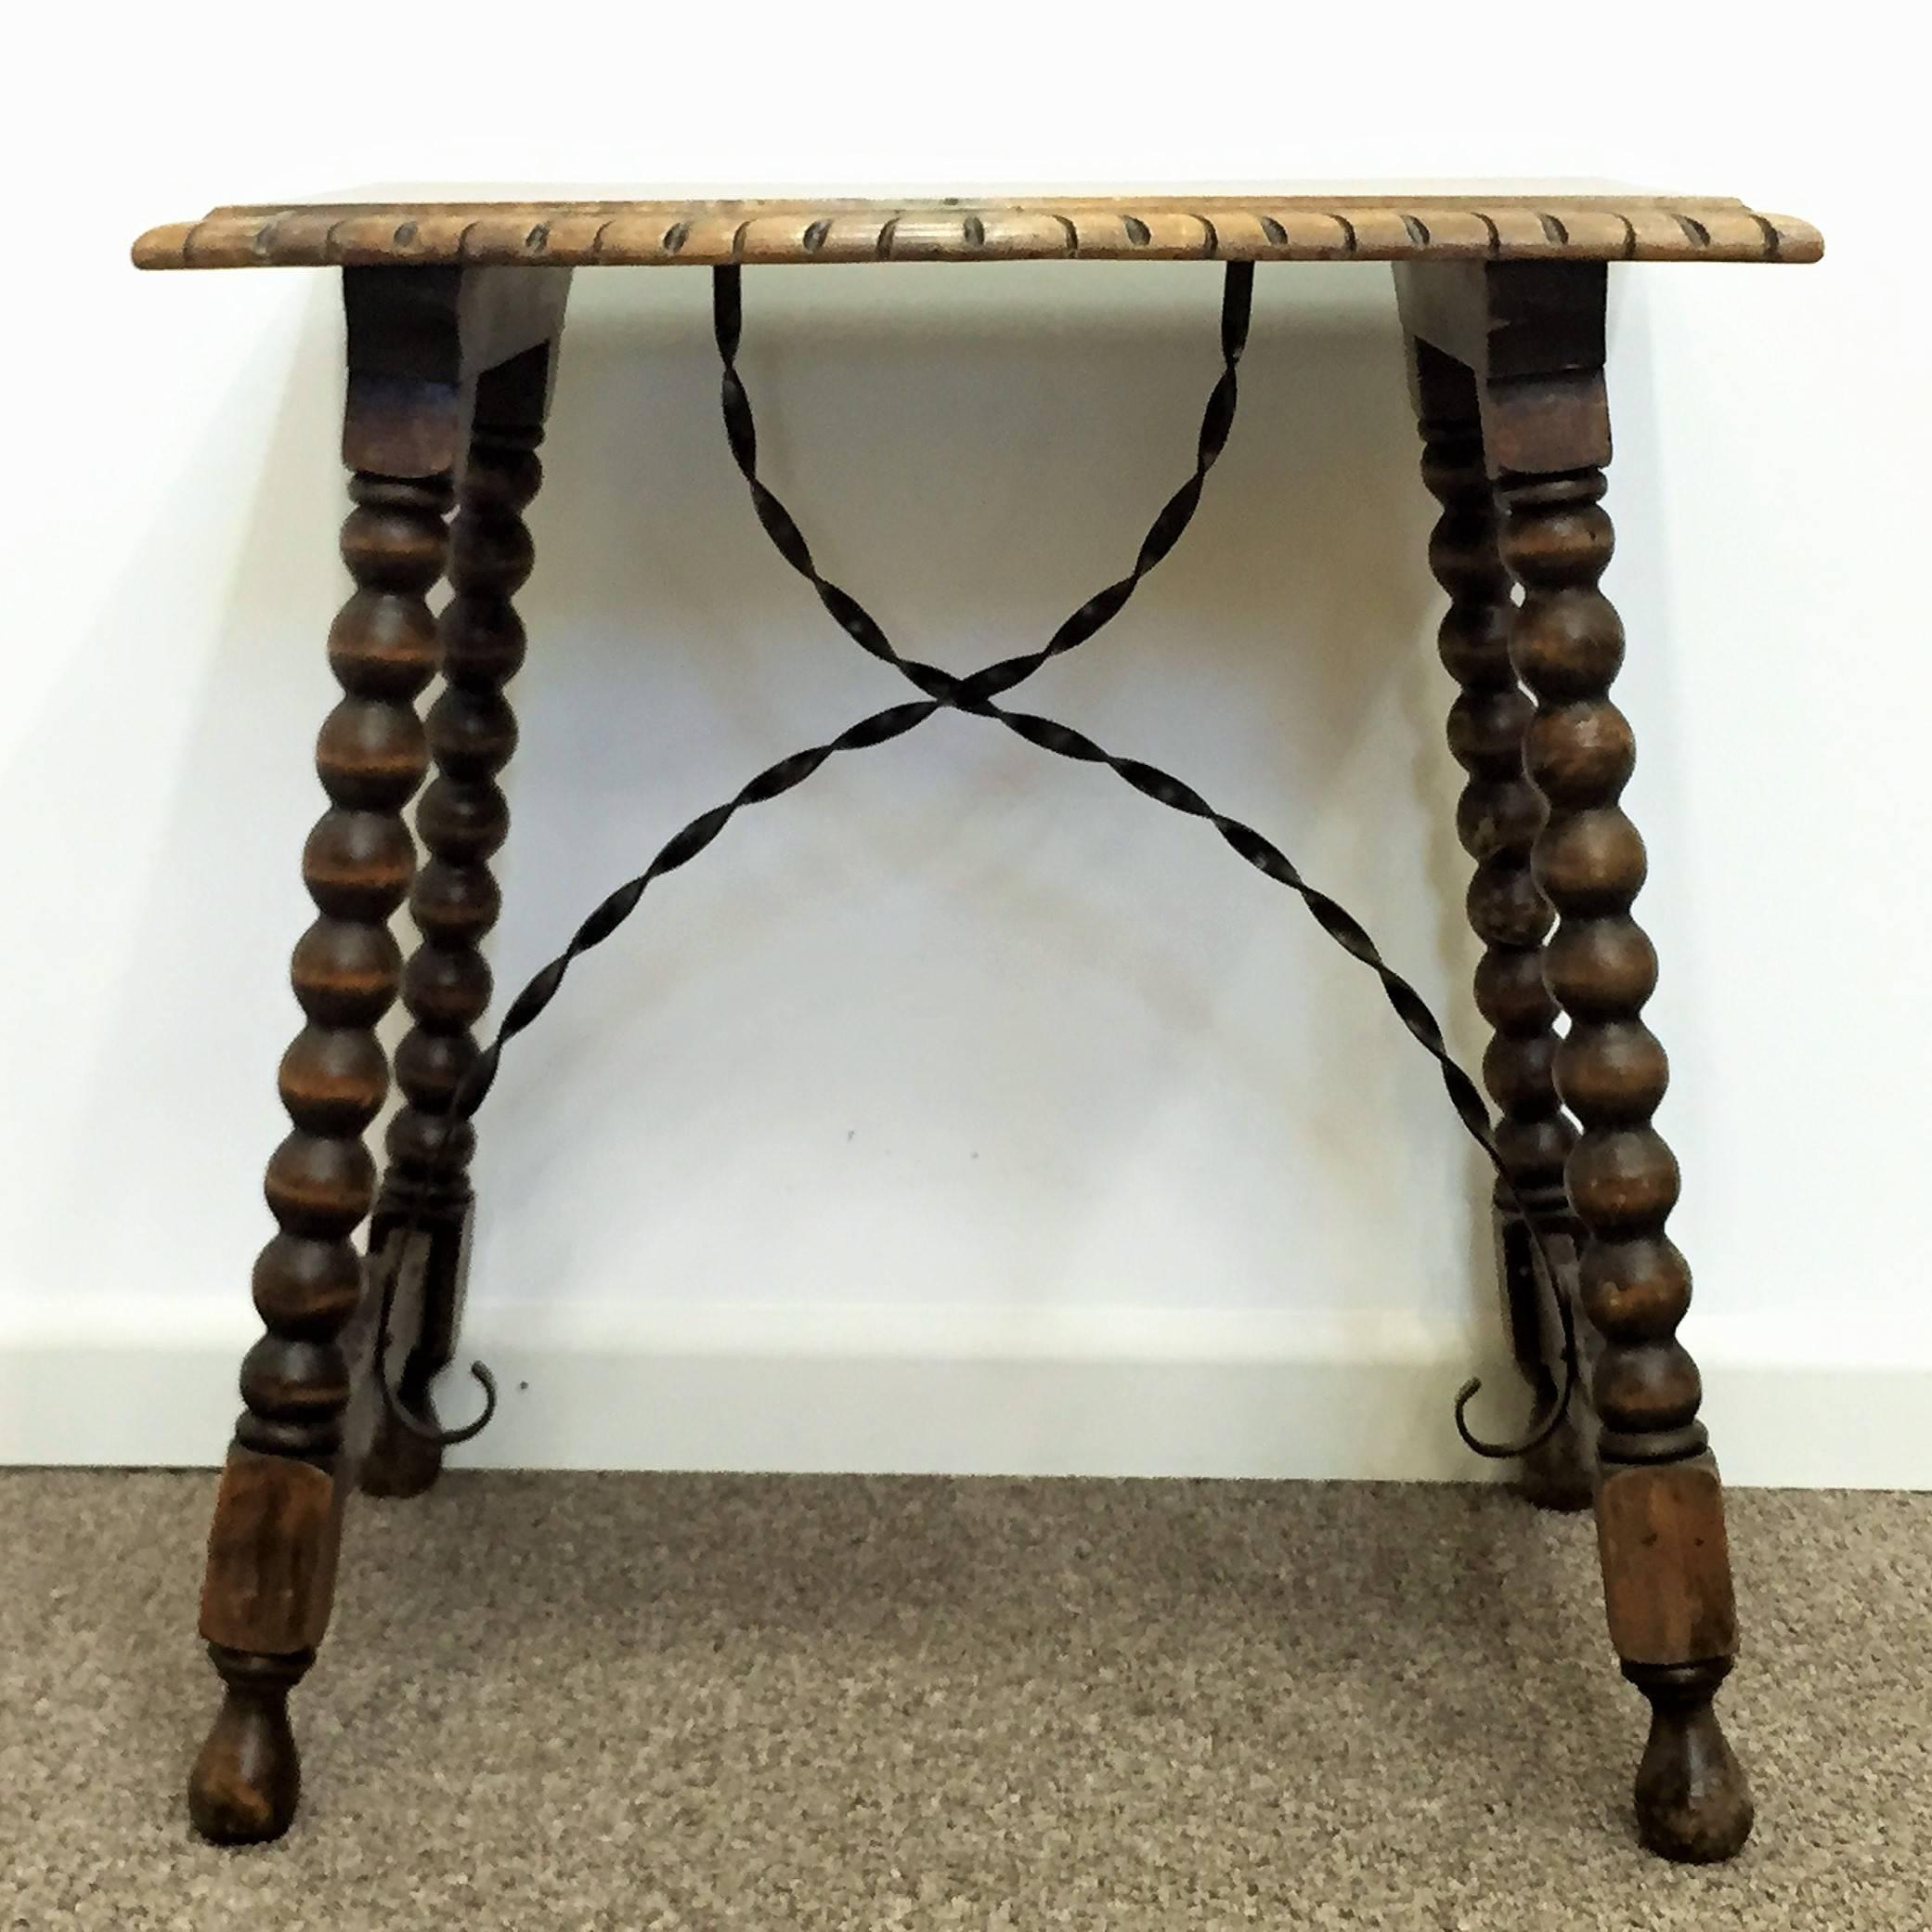 18th century Spanish side table.
Early 19th century Spanish trestle table in walnut and iron. This piece has a great scale, lovely turned legs and iron stretcher. The top is made from a single piece of wood. This table could be used as an end